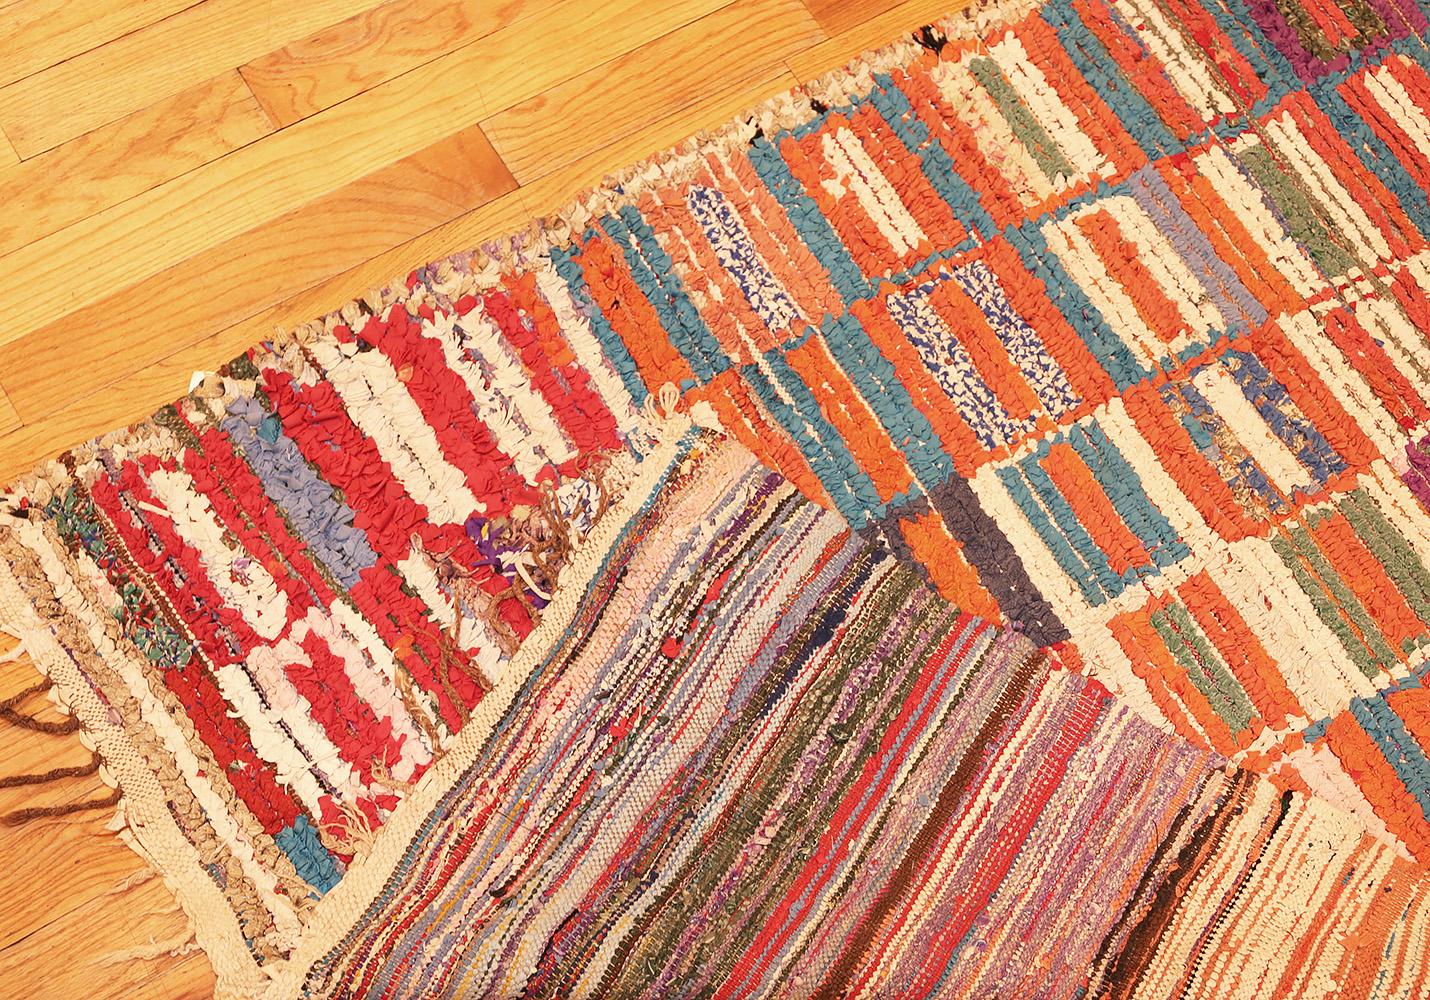 A beautiful long and narrow size, mid-20th century, vintage Moroccan rag rug. Size: 3 ft 10 in x 8 ft 8 in (1.17 m x 2.64 m)

This alluring vintage Moroccan rug features an exceptionally modern visage decorated with compartmental motifs rendered in